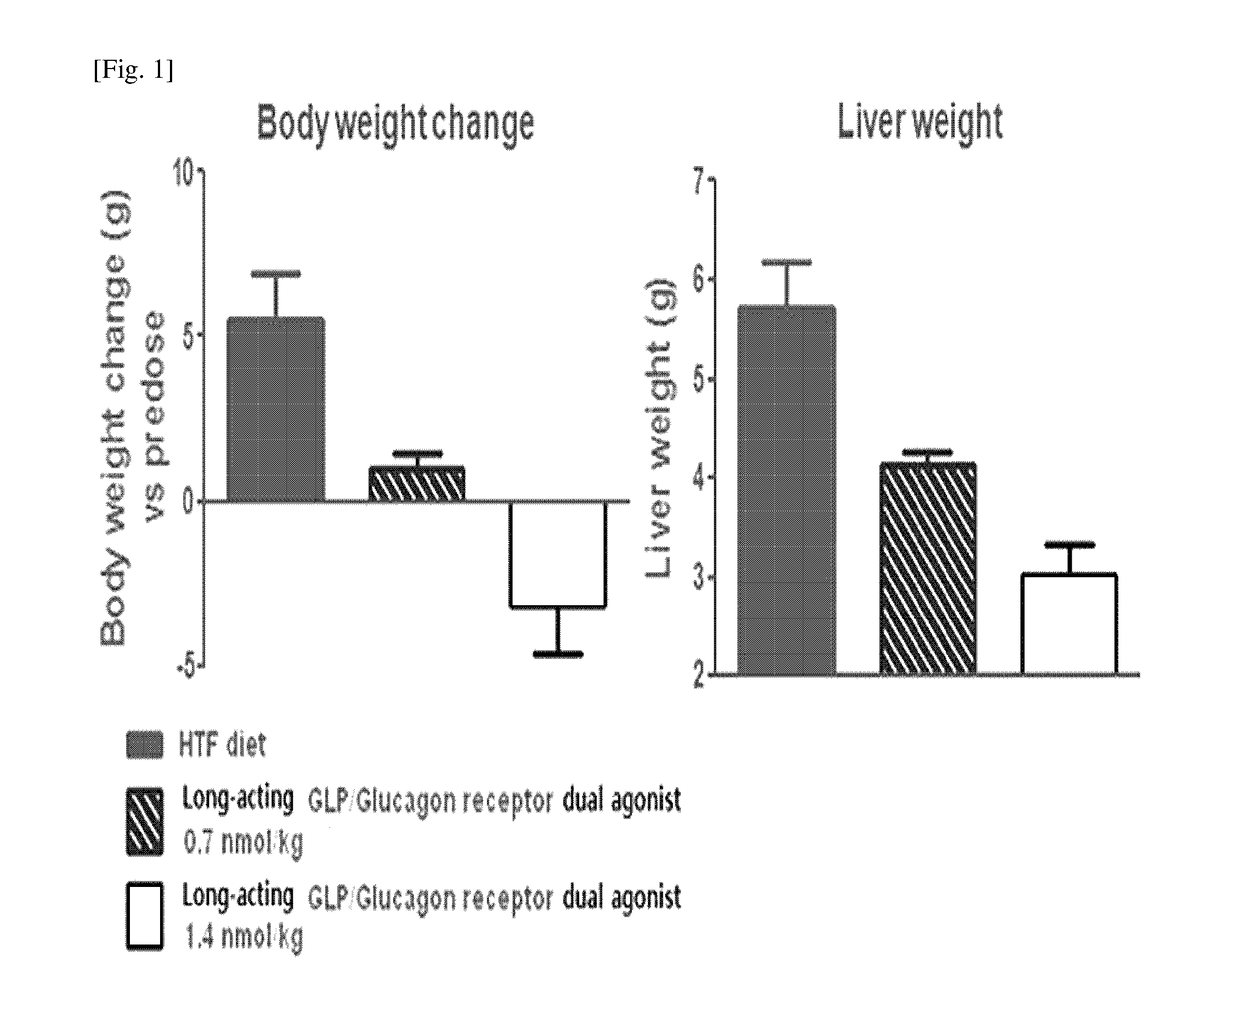 Use of a long acting GLP-1/glucagon receptor dual agonist for the treatment of non-alcoholic fatty liver disease